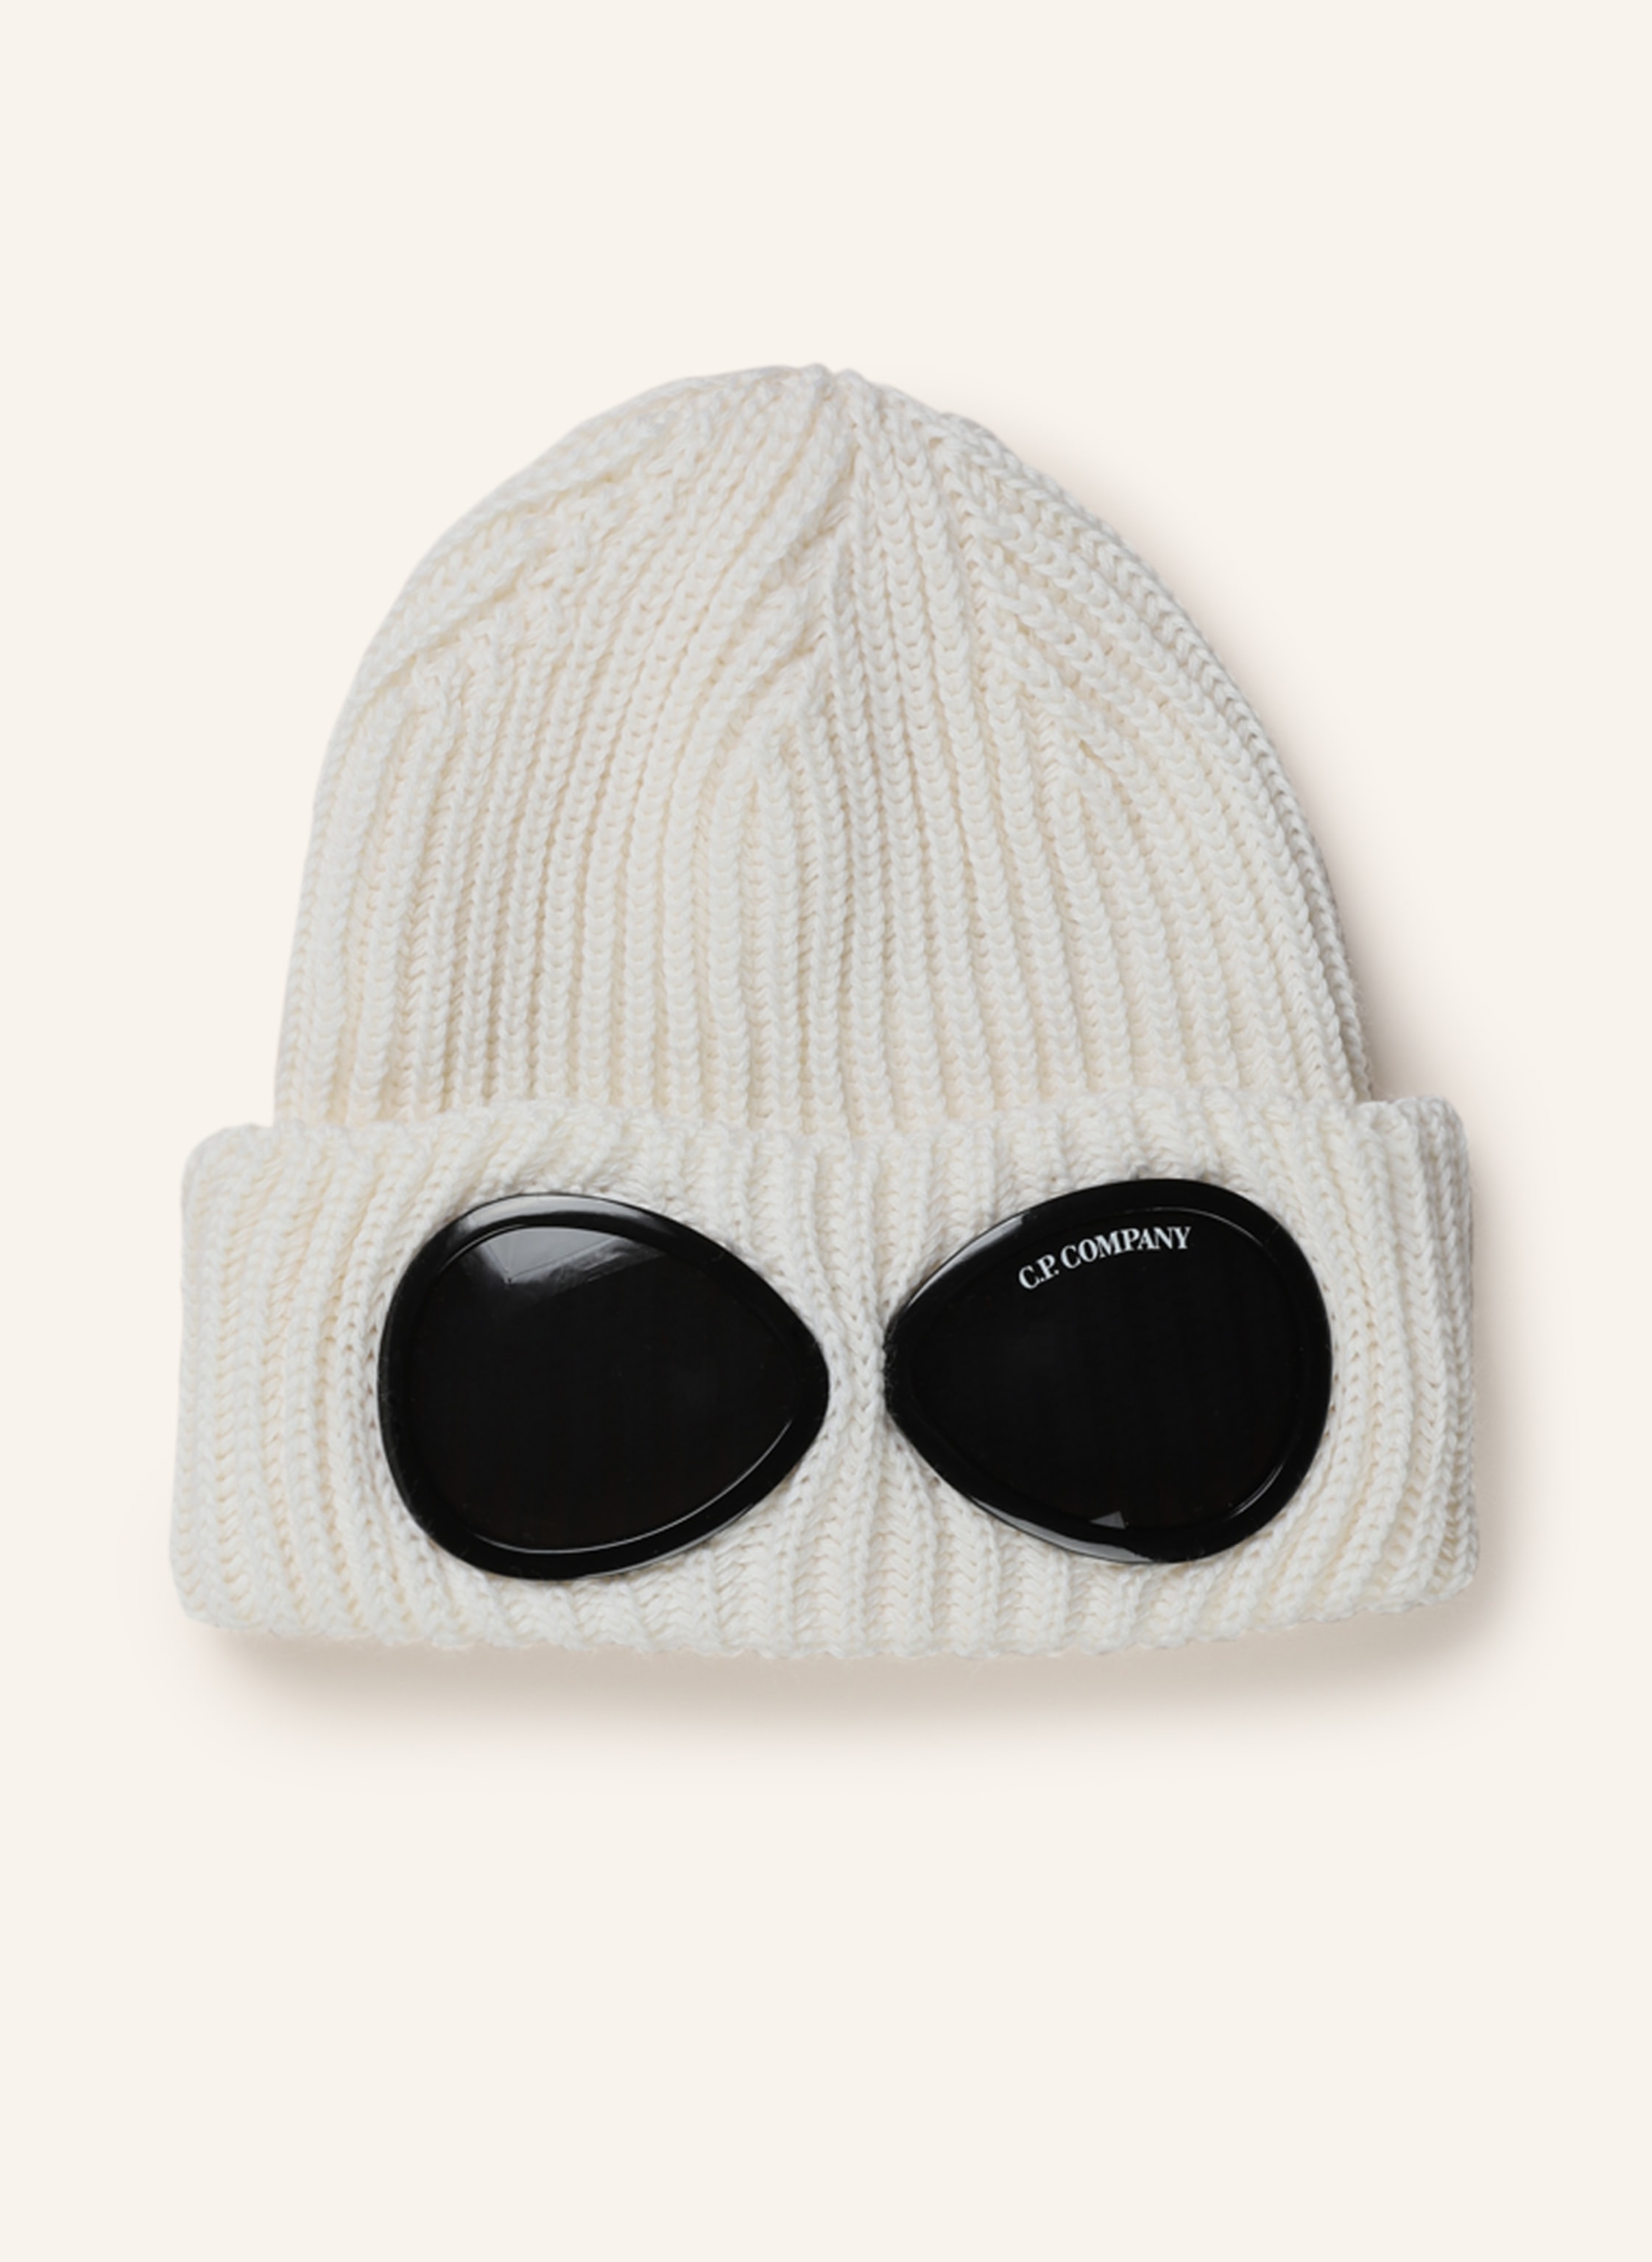 C.P. Company knitted beanie with goggle detail in khaki